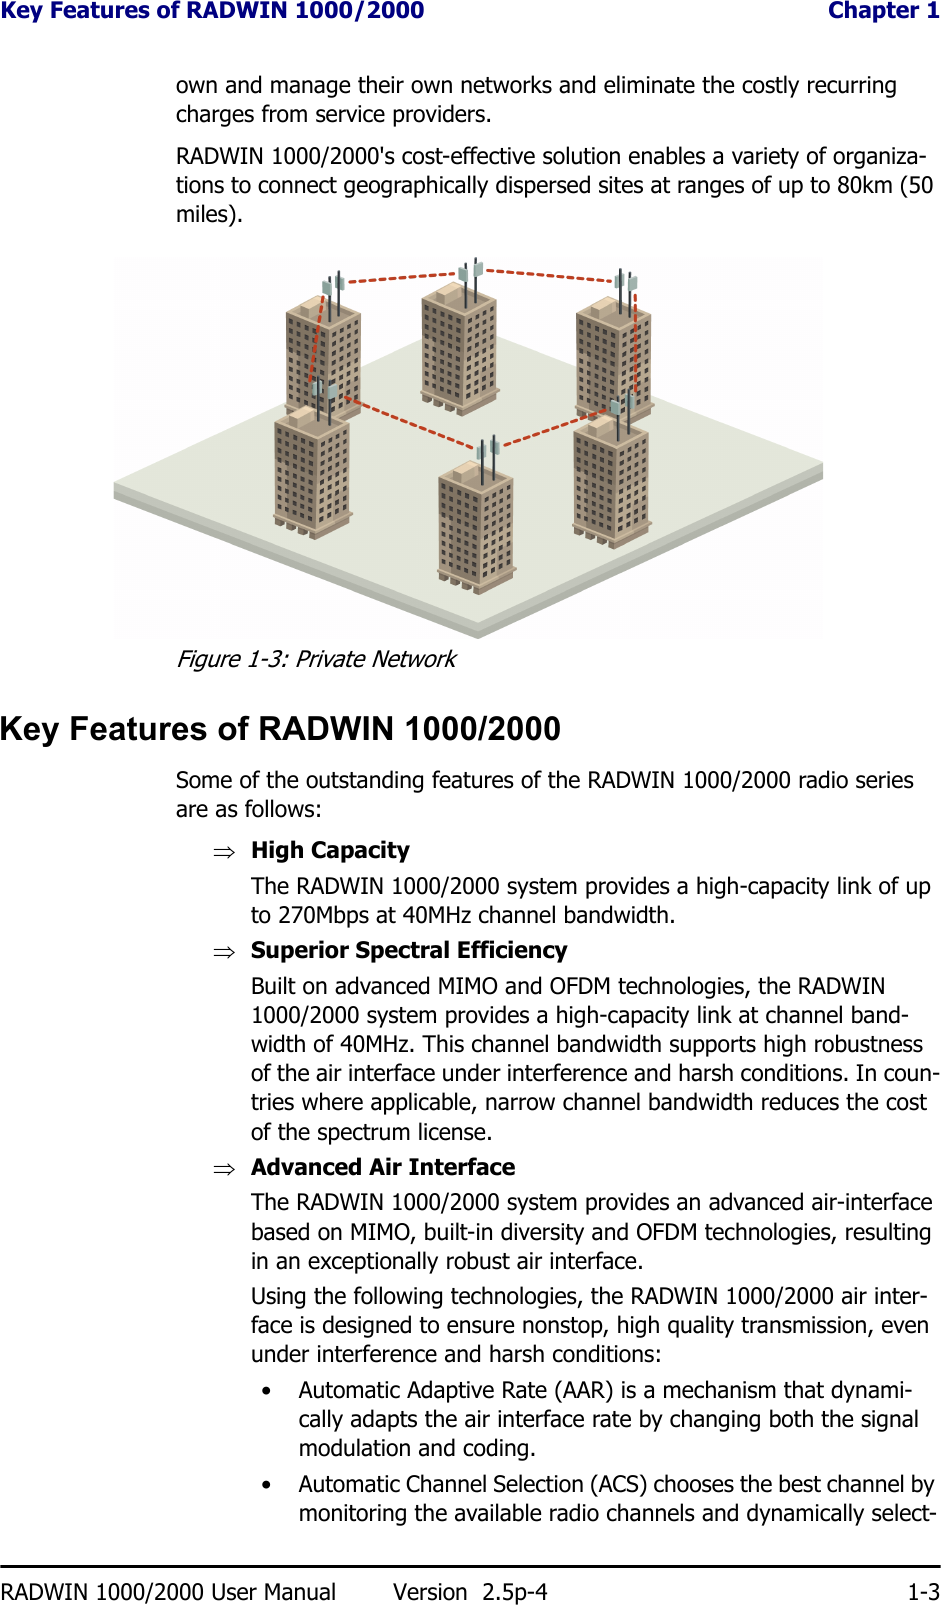 Key Features of RADWIN 1000/2000  Chapter 1RADWIN 1000/2000 User Manual Version  2.5p-4 1-3own and manage their own networks and eliminate the costly recurring charges from service providers.RADWIN 1000/2000&apos;s cost-effective solution enables a variety of organiza-tions to connect geographically dispersed sites at ranges of up to 80km (50 miles).Figure 1-3: Private NetworkKey Features of RADWIN 1000/2000Some of the outstanding features of the RADWIN 1000/2000 radio series are as follows:⇒High CapacityThe RADWIN 1000/2000 system provides a high-capacity link of up to 270Mbps at 40MHz channel bandwidth.⇒Superior Spectral EfficiencyBuilt on advanced MIMO and OFDM technologies, the RADWIN 1000/2000 system provides a high-capacity link at channel band-width of 40MHz. This channel bandwidth supports high robustness of the air interface under interference and harsh conditions. In coun-tries where applicable, narrow channel bandwidth reduces the cost of the spectrum license.⇒Advanced Air InterfaceThe RADWIN 1000/2000 system provides an advanced air-interface based on MIMO, built-in diversity and OFDM technologies, resulting in an exceptionally robust air interface. Using the following technologies, the RADWIN 1000/2000 air inter-face is designed to ensure nonstop, high quality transmission, even under interference and harsh conditions:• Automatic Adaptive Rate (AAR) is a mechanism that dynami-cally adapts the air interface rate by changing both the signal modulation and coding.• Automatic Channel Selection (ACS) chooses the best channel by monitoring the available radio channels and dynamically select-